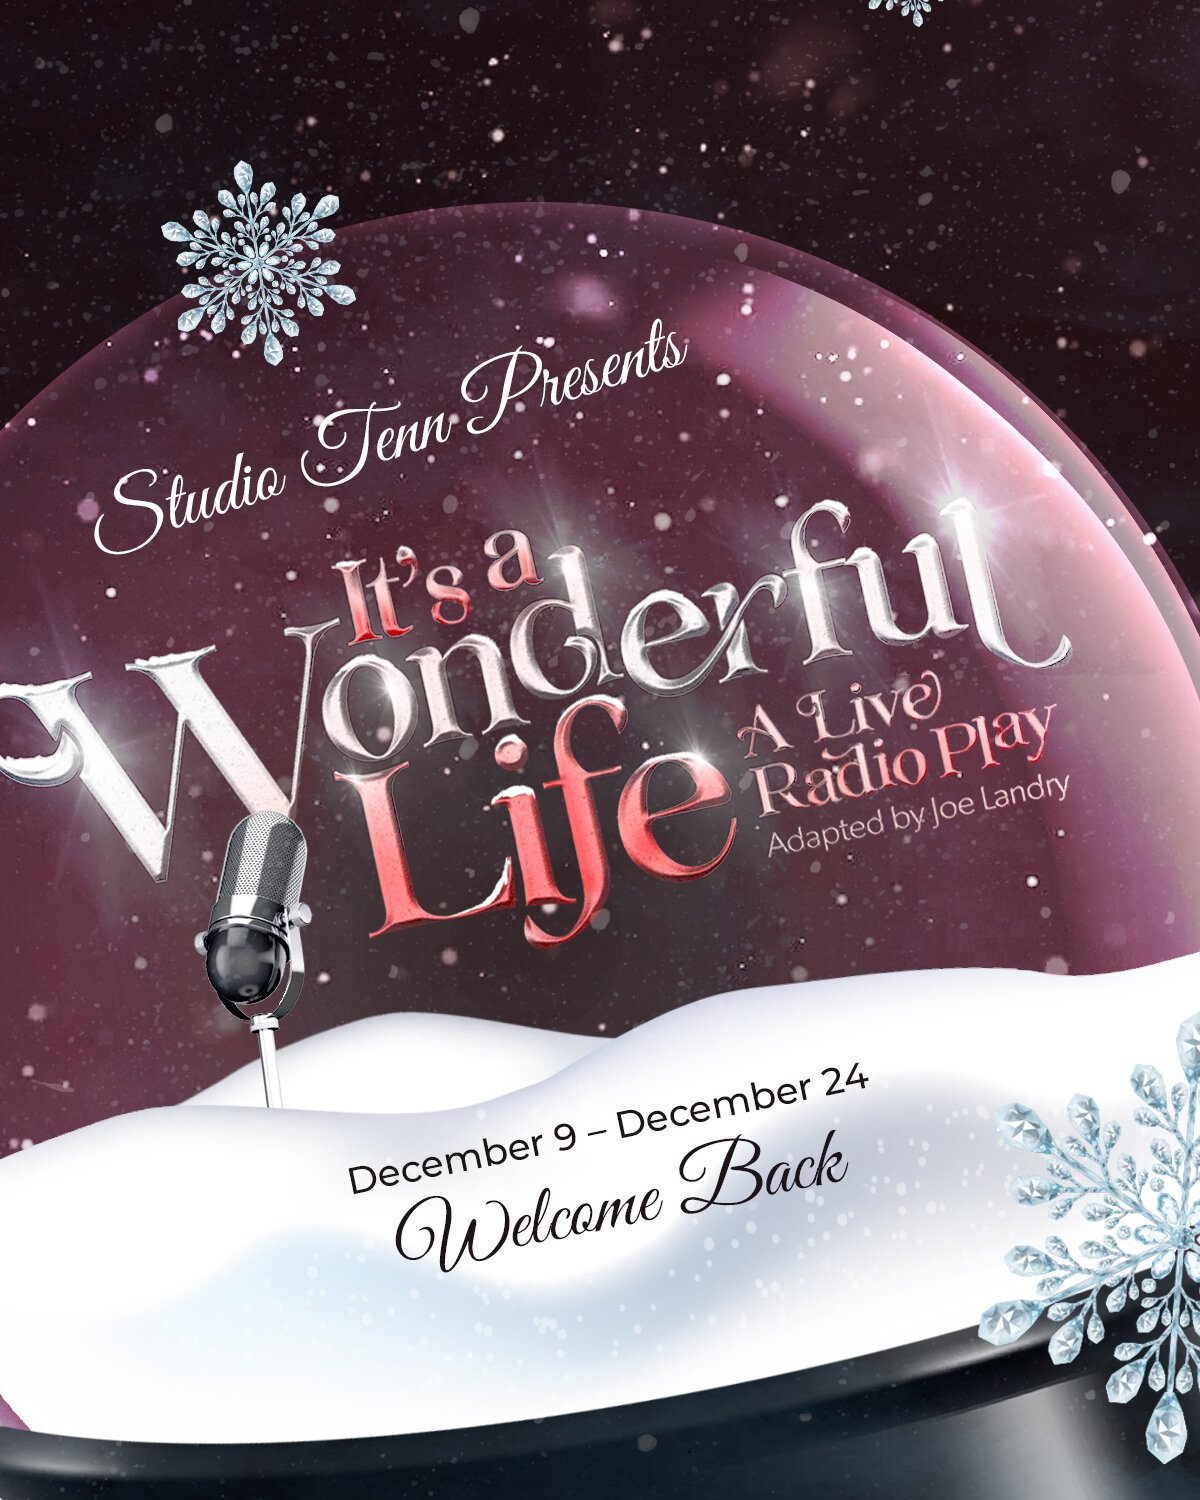 Downtown Franklin TN Event, It's a Wonderful Life- A Live Radio Play.